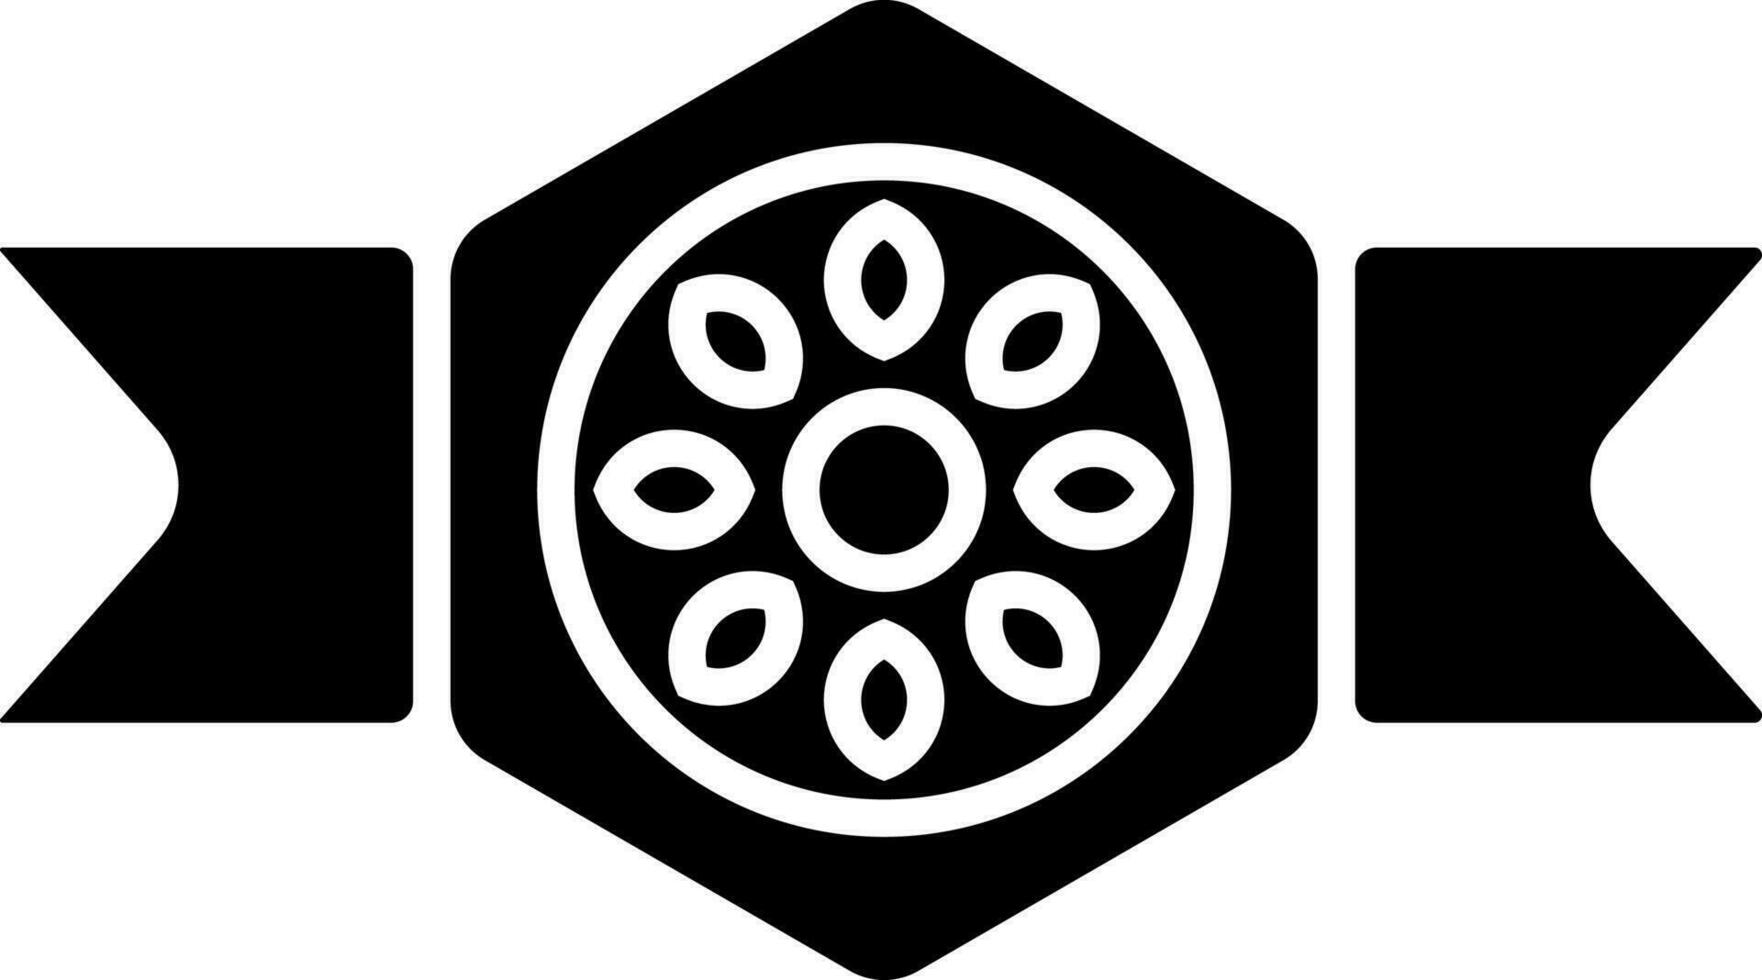 Black and White icon of badge isolated in flat style. vector